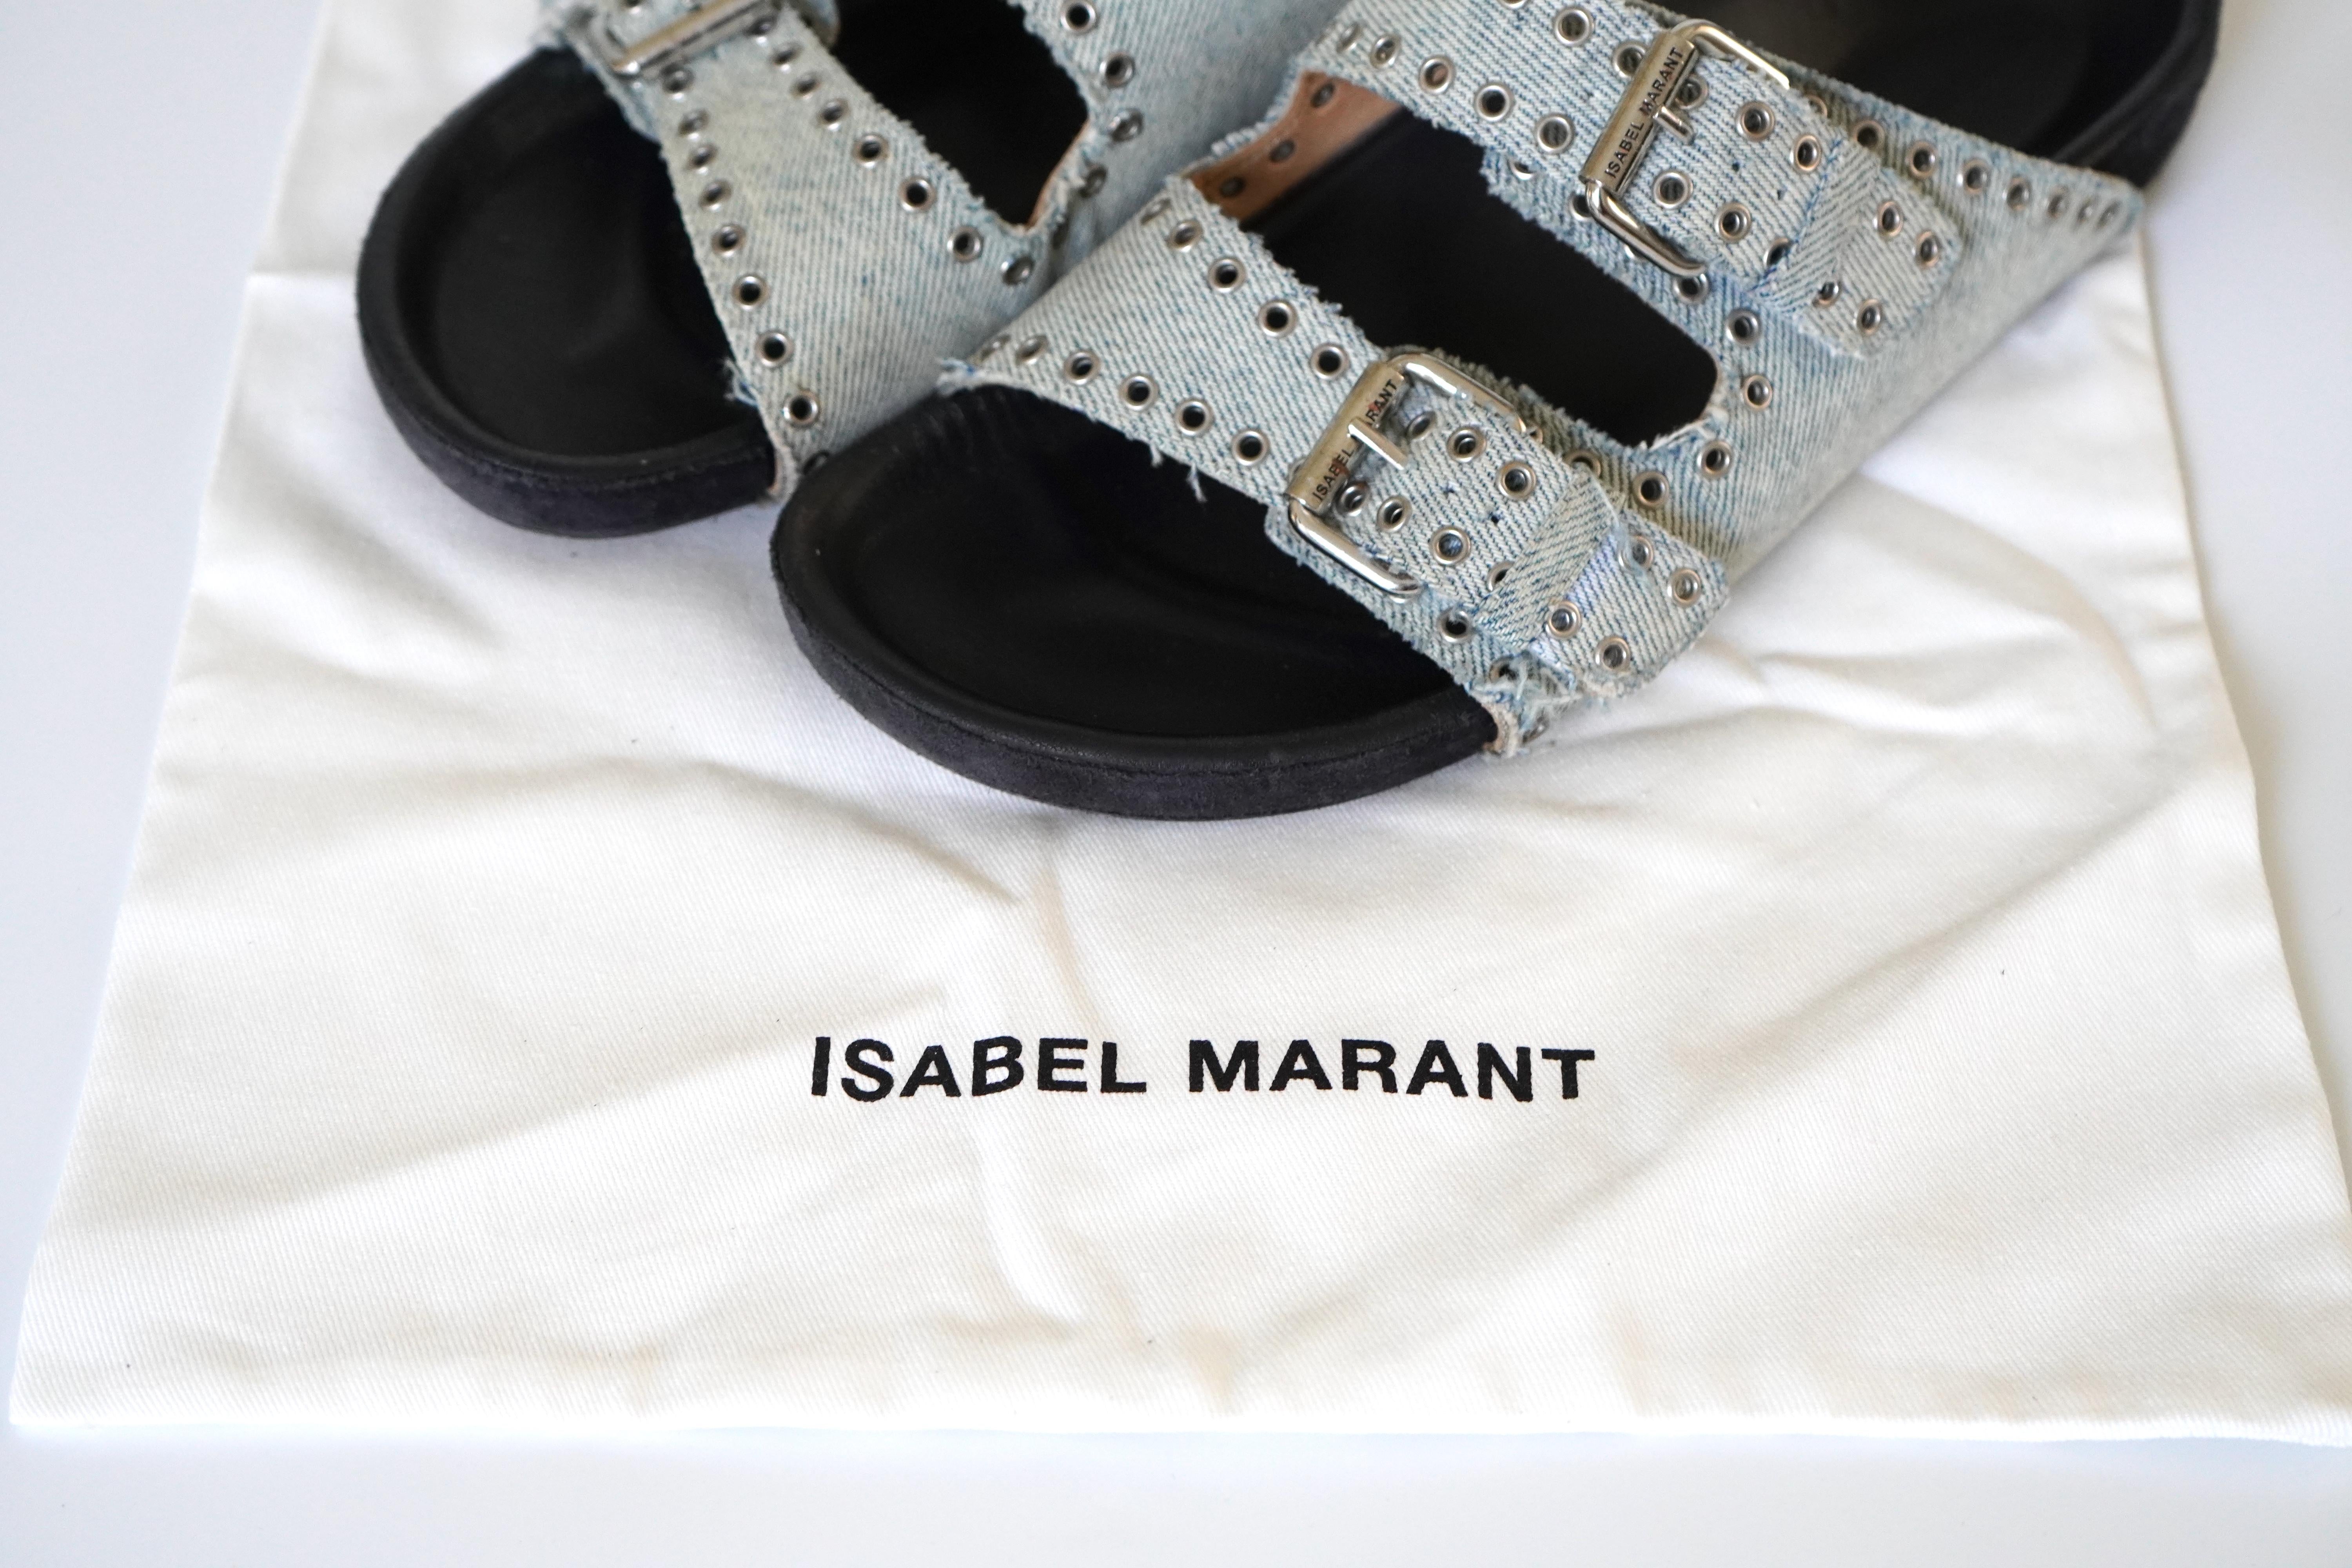 Isabel Marant Lennyo Denim Dual-buckle Eyelet-embellished Sandals. They are made of leather and cotton. We have them in size EU 39. Comes with the duster bag. Some minor wear, still in great condition. 

Isabel Marant is an eponymous clothing brand